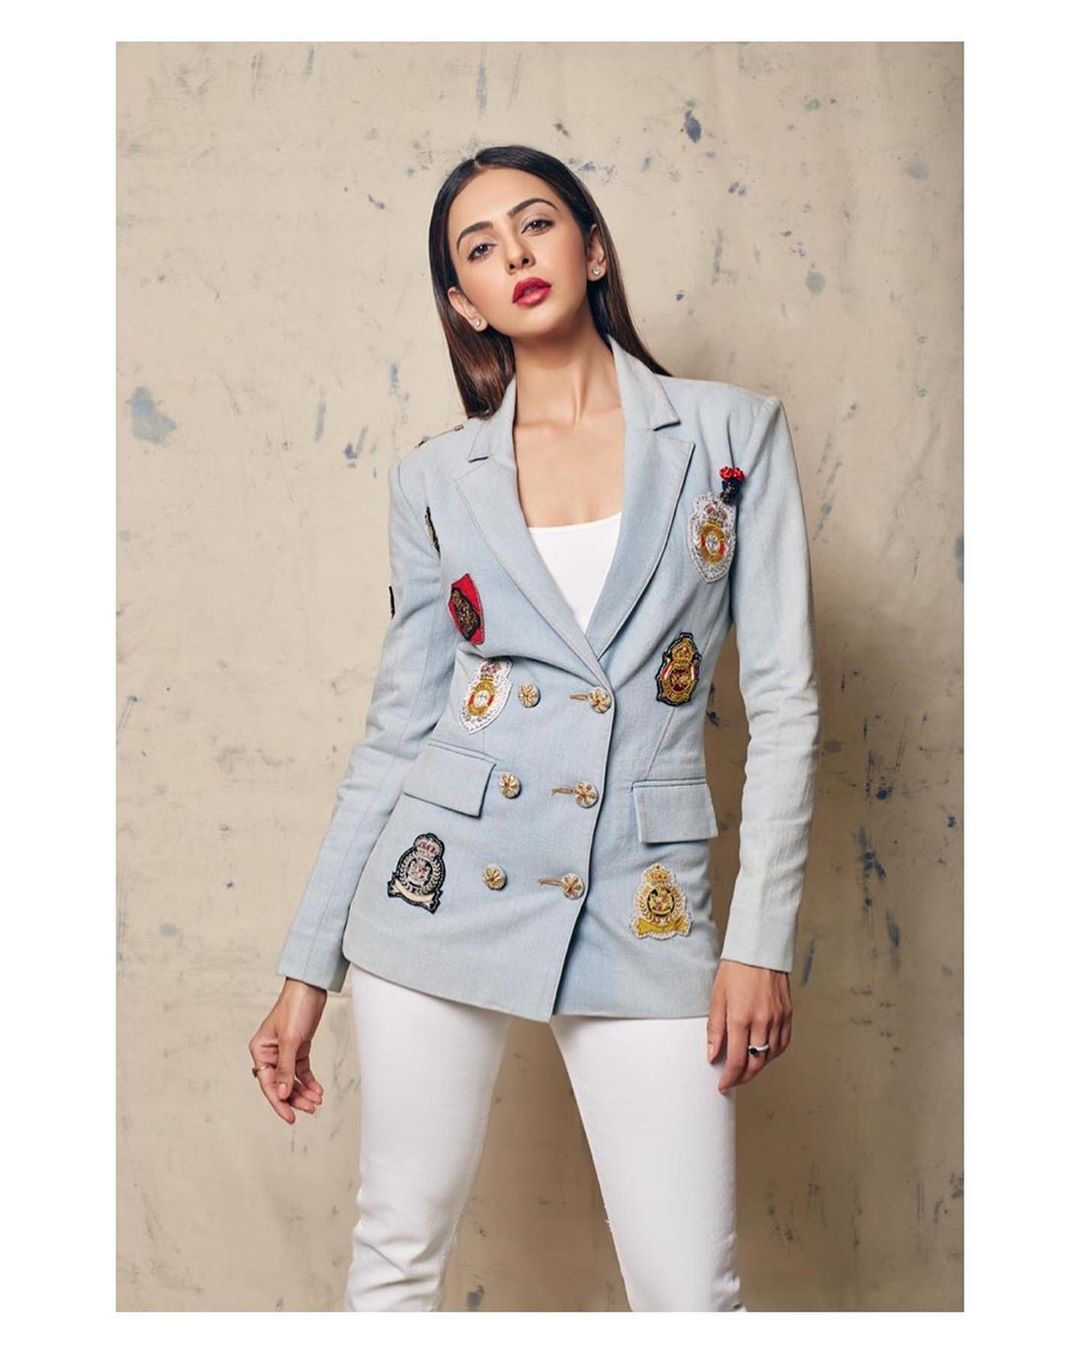 Rakul Preet In A Funky Coat While Posting For A Photo Shoot